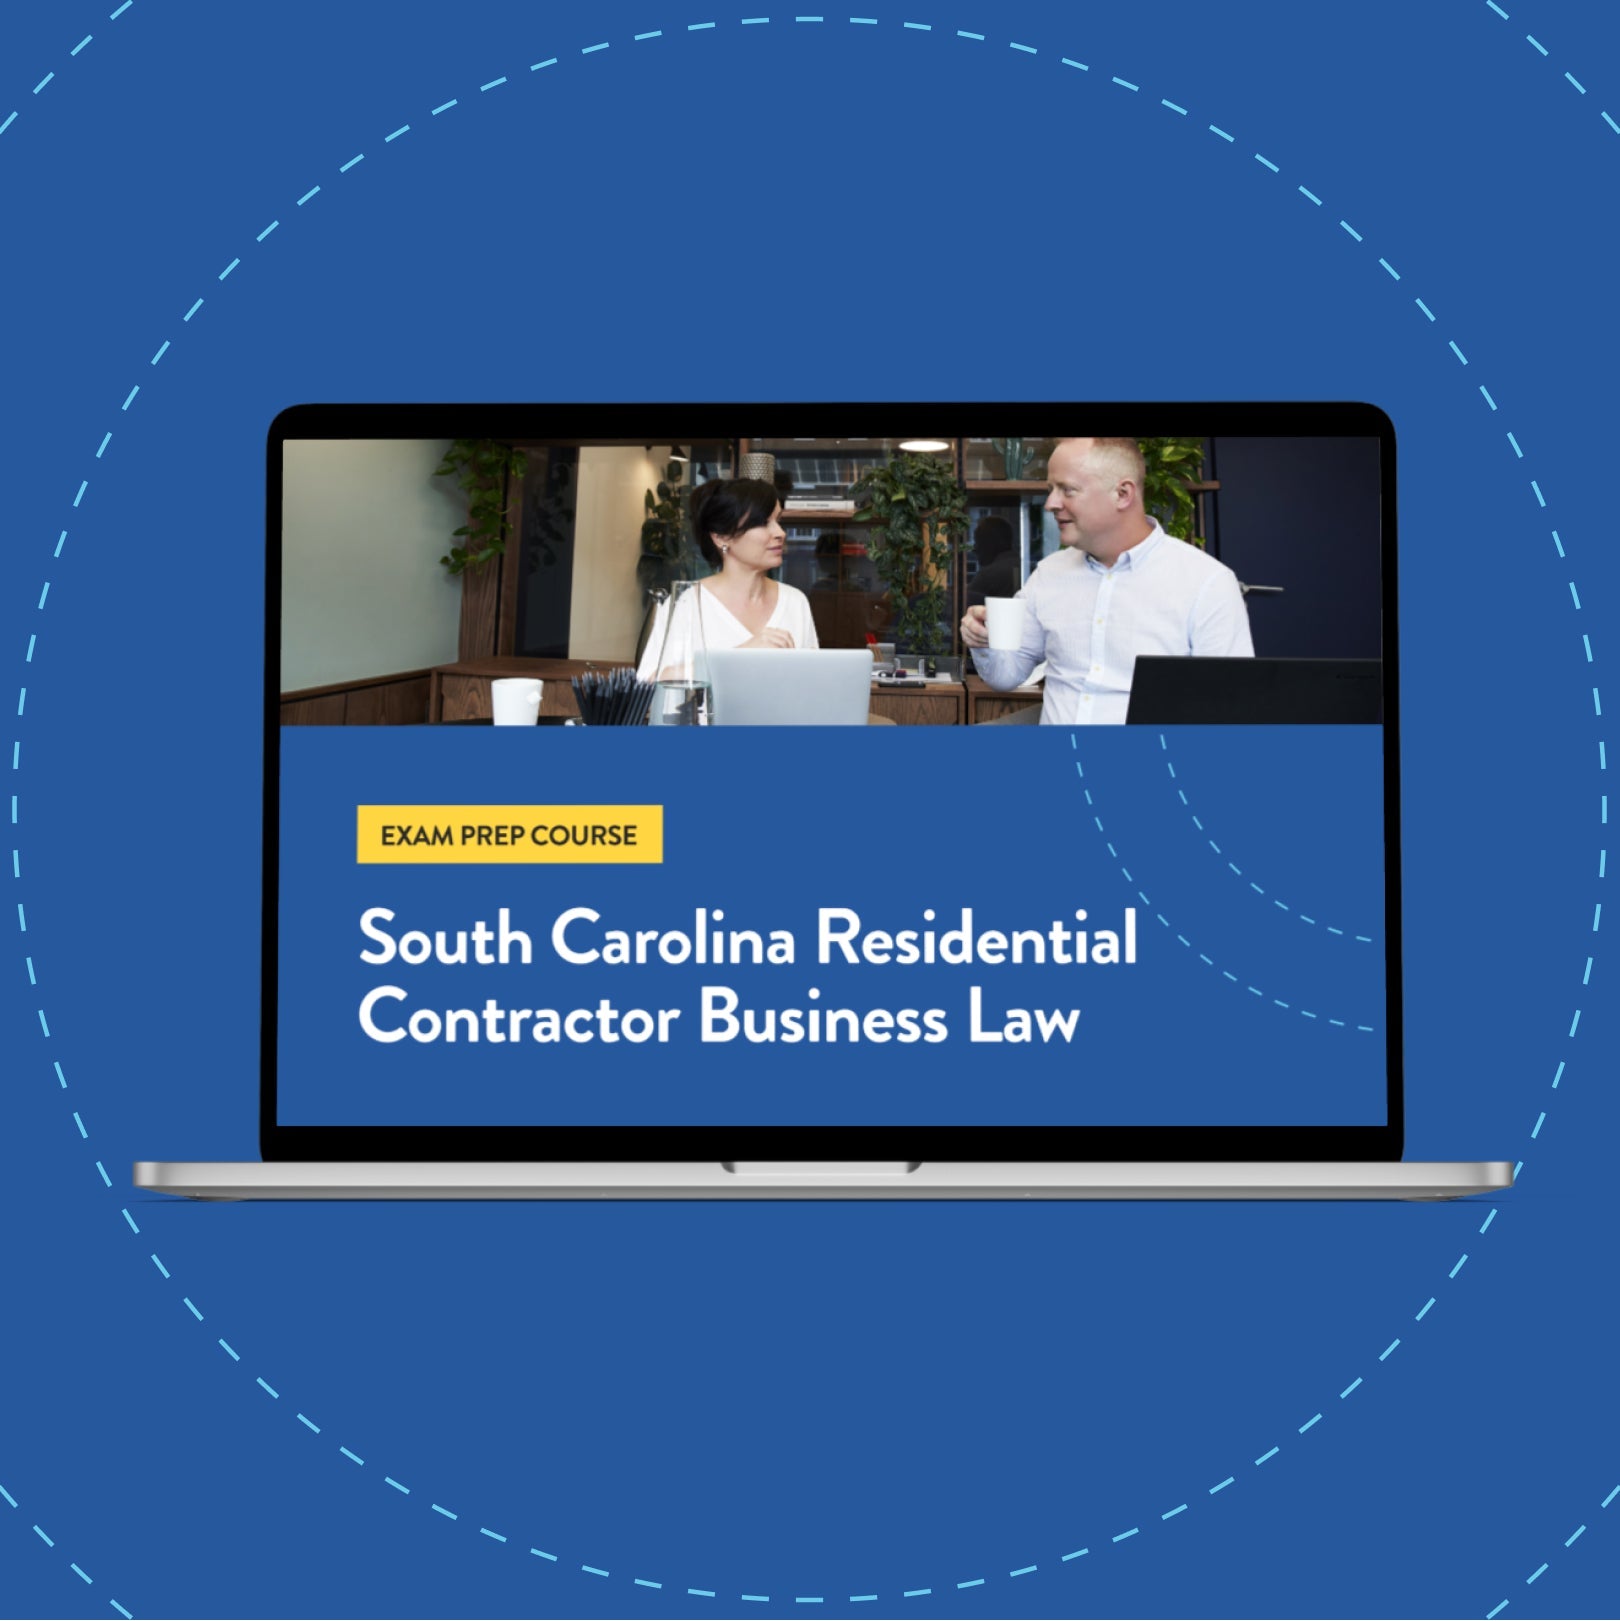 South Carolina Residential Contractor Business Law Exam Prep Course